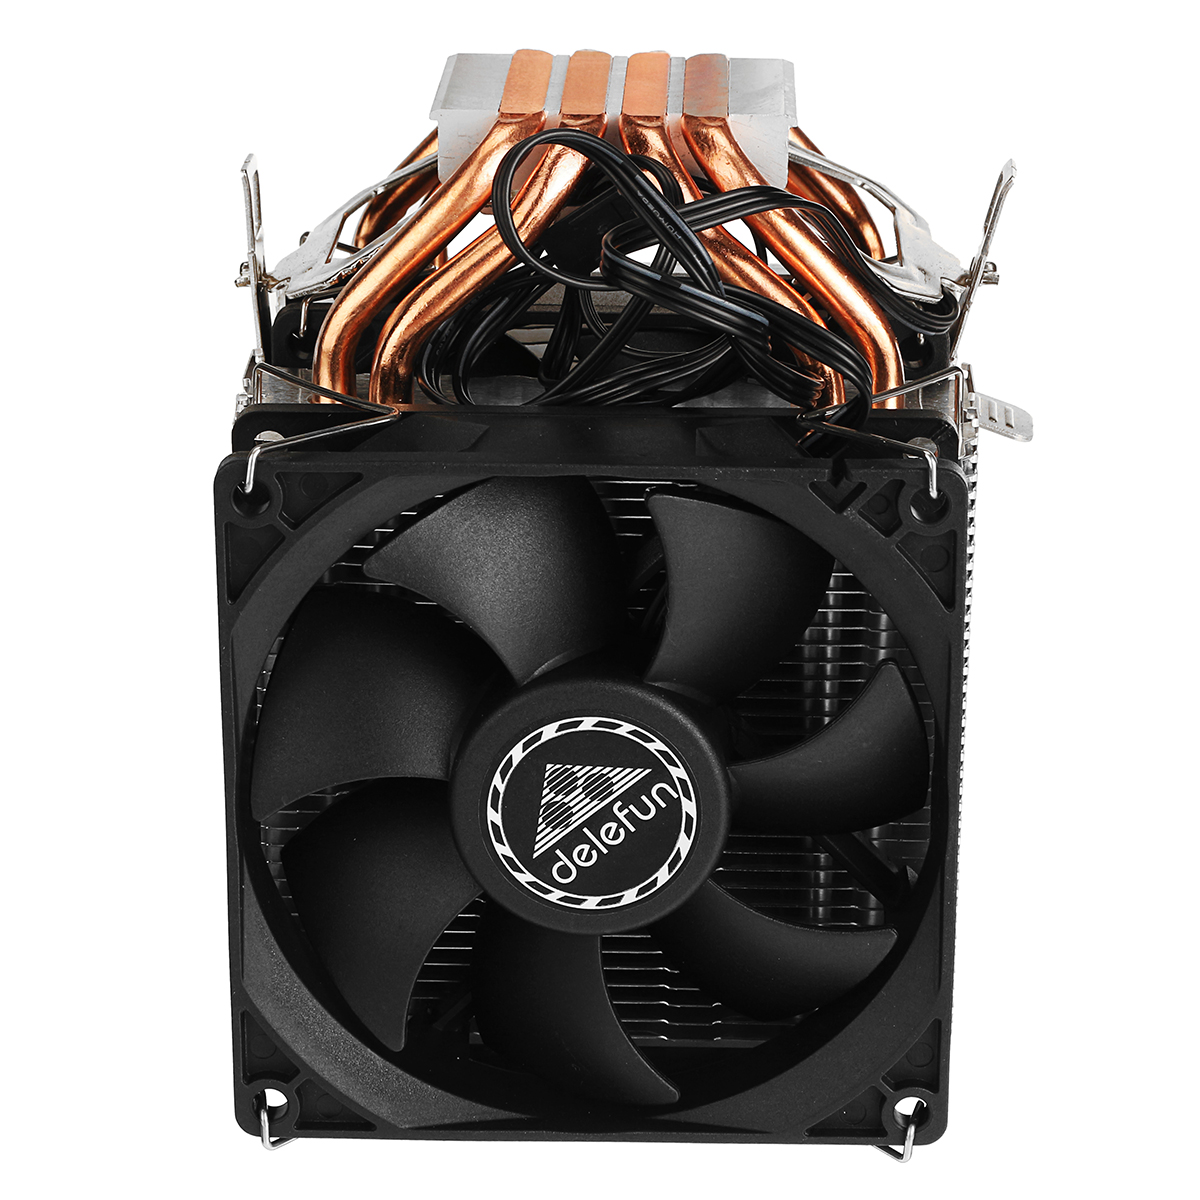 Find Delefun CPU Fan 3 Pin Four Heat Pipes Silent Computer Case Cooling Fan CPU Heatsink Cooler with Mounting Bracket for AMD 2011 X79 X99 299 for Sale on Gipsybee.com with cryptocurrencies